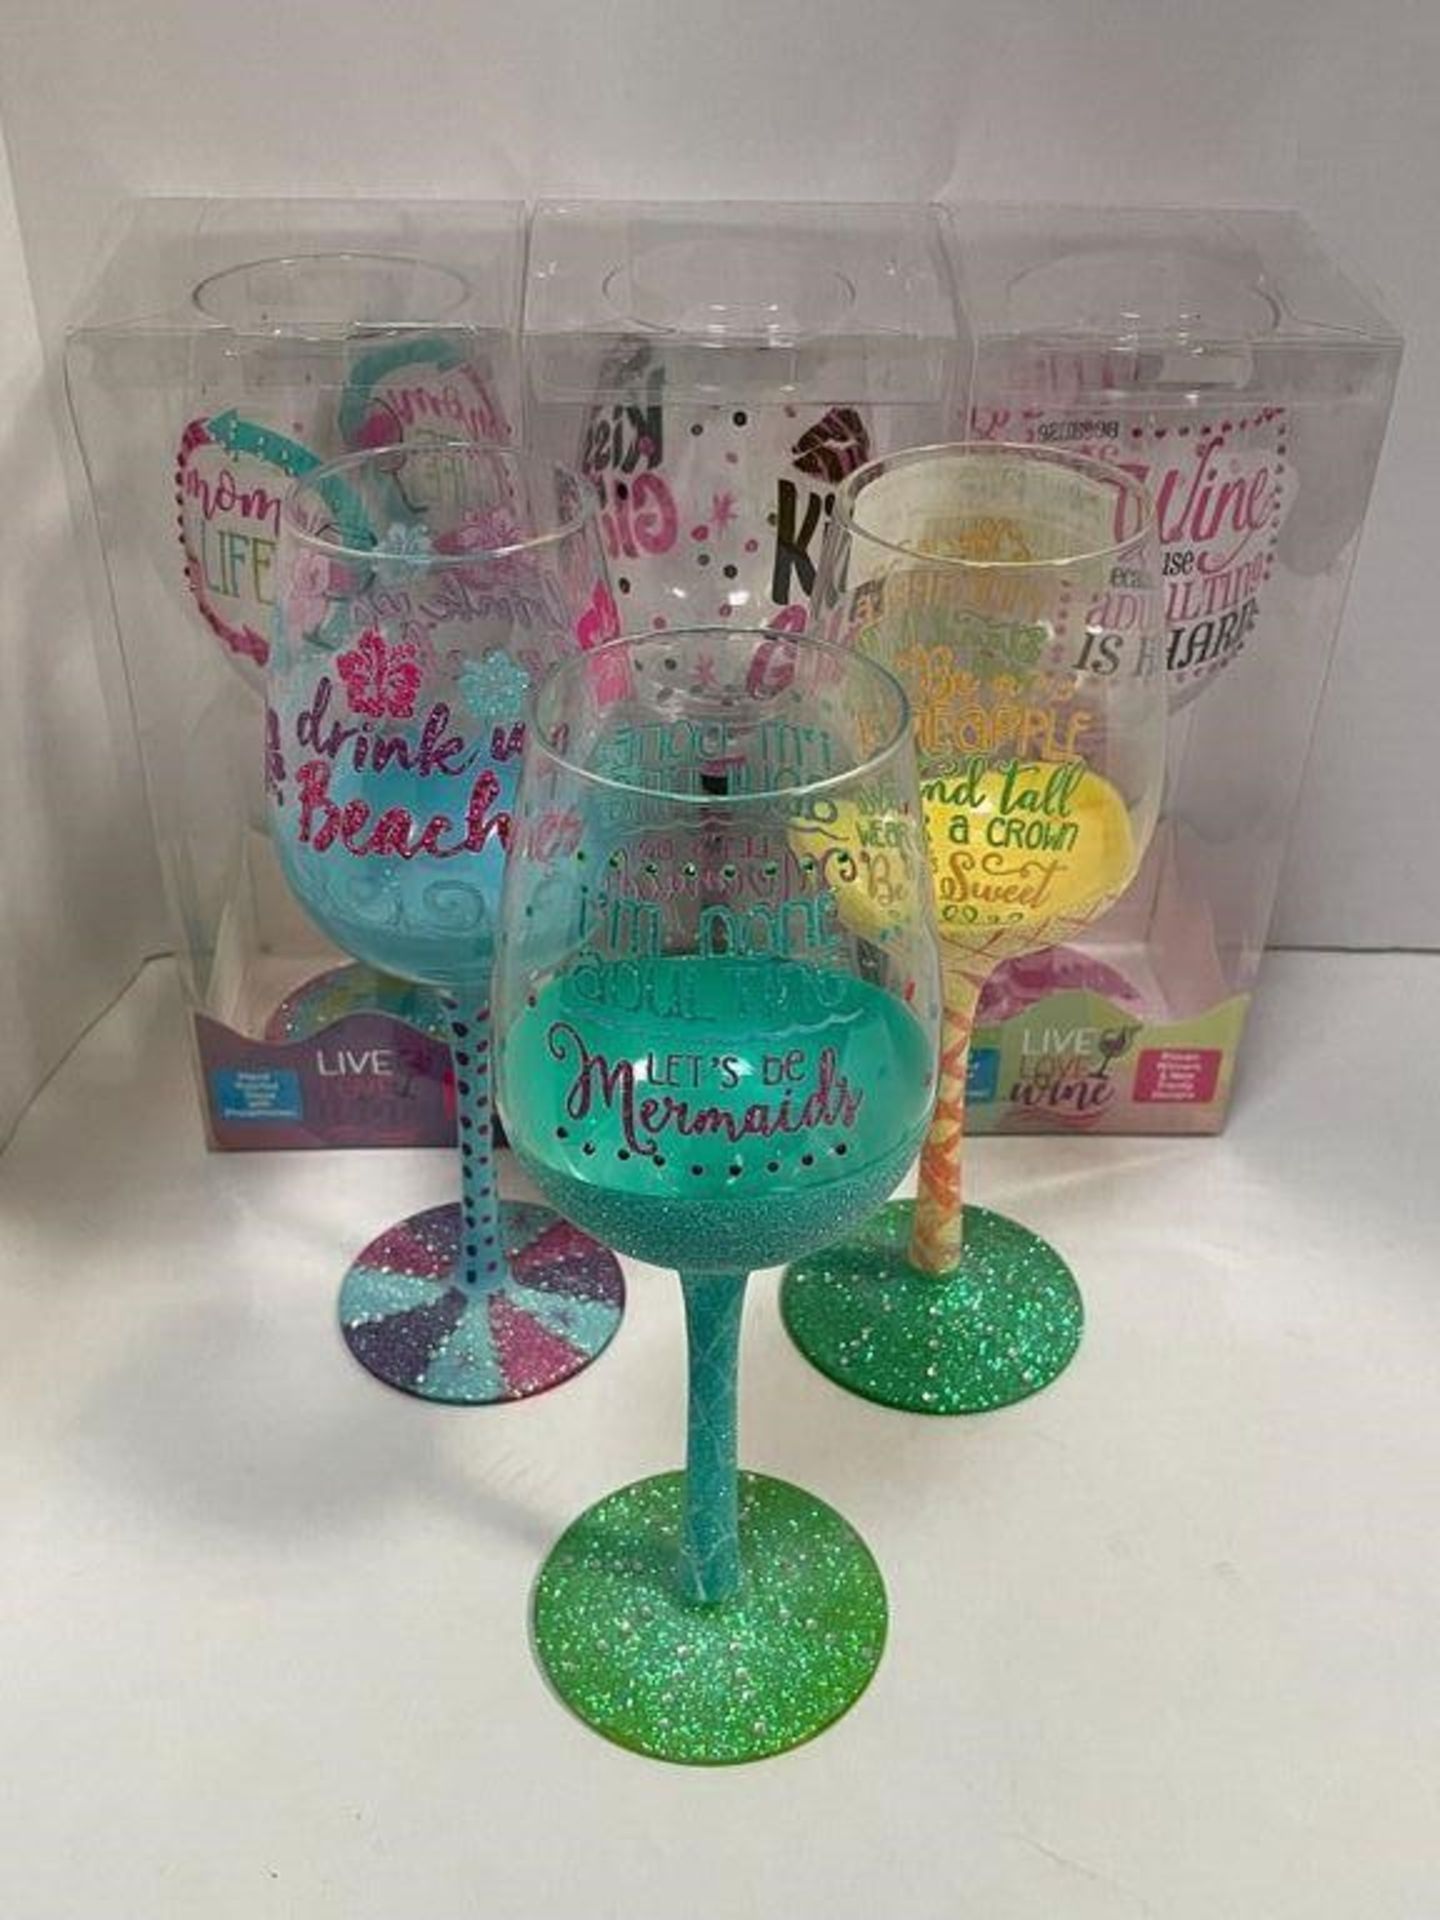 6 X DECORATED WINE GLASSES WITH FUN SAYINGS/PHRASES, VAROUS SAYINGS AND DESIGNS